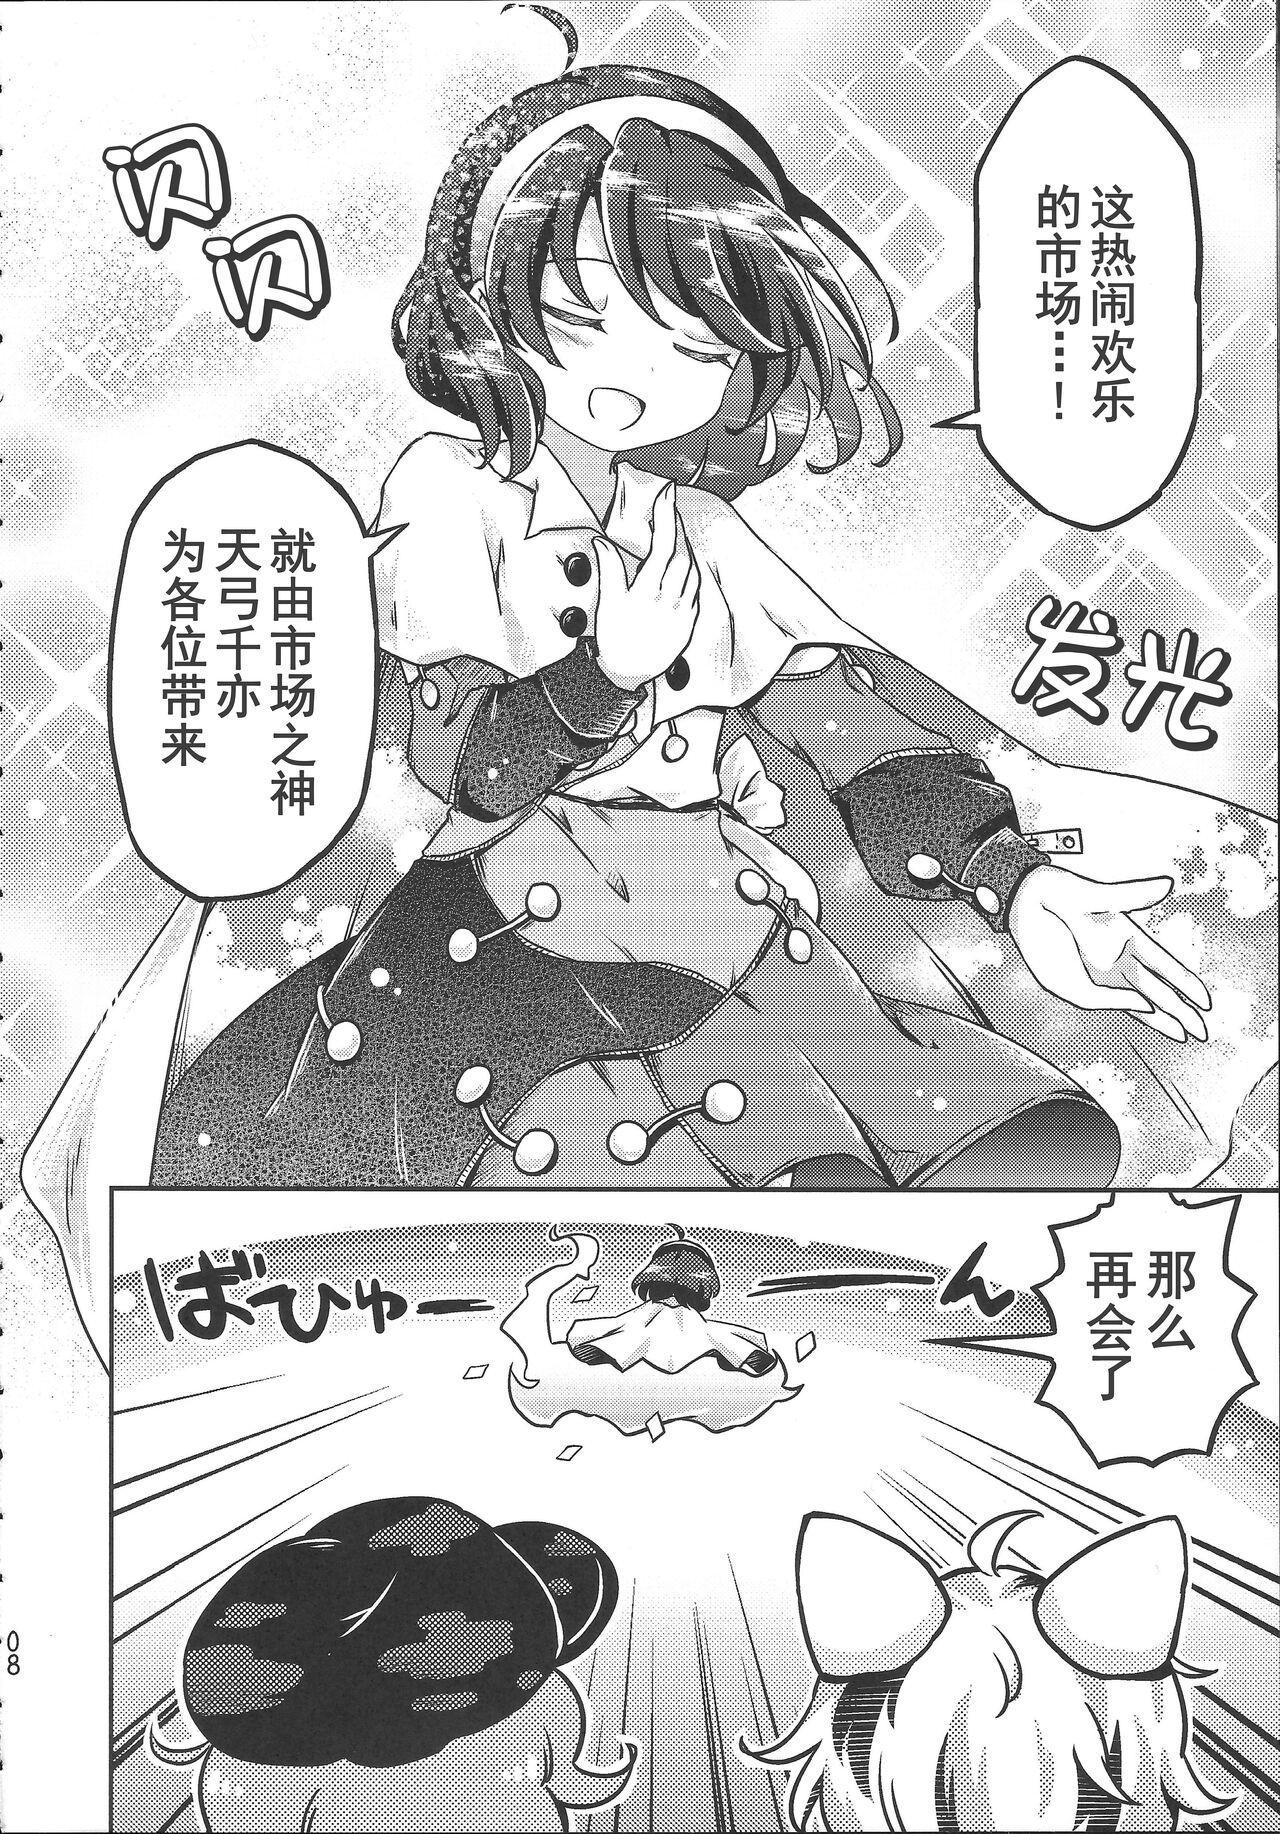 Whatsapp 《千亦酱的活动日志》 - Touhou project Sologirl - Page 8